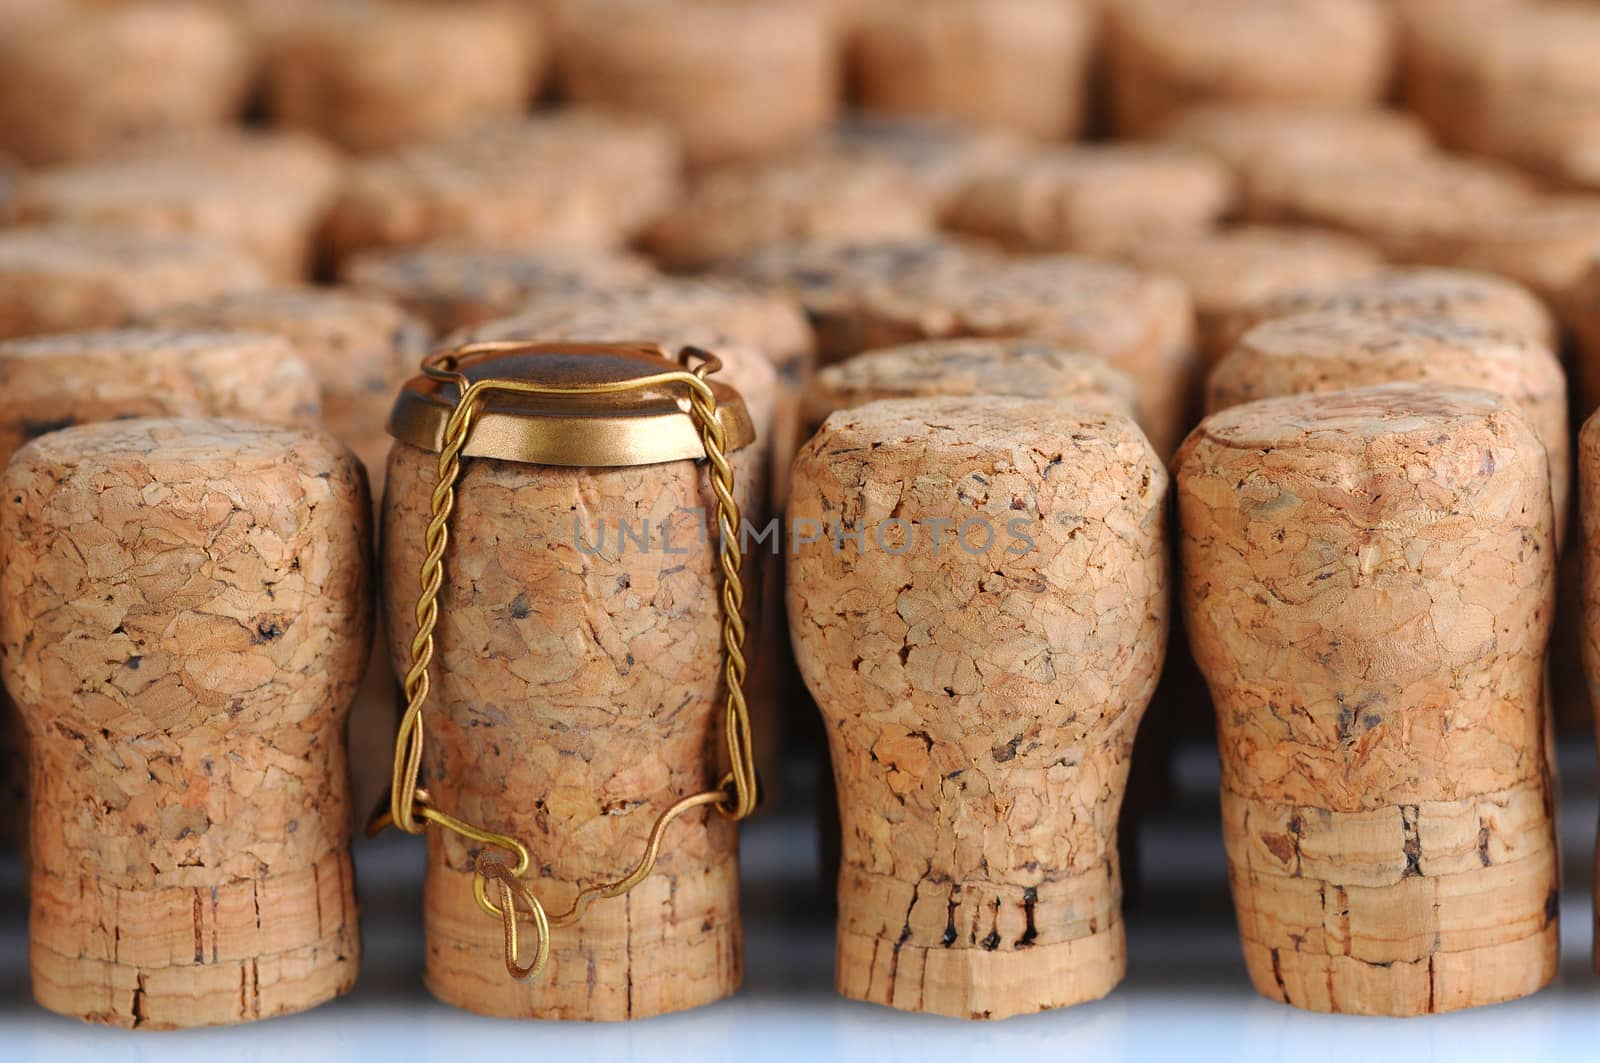 Closeup of a large group of Champagne corks, that fill the frame. Selective focus on the front row. One cork has the metal cage. Horizontal format.